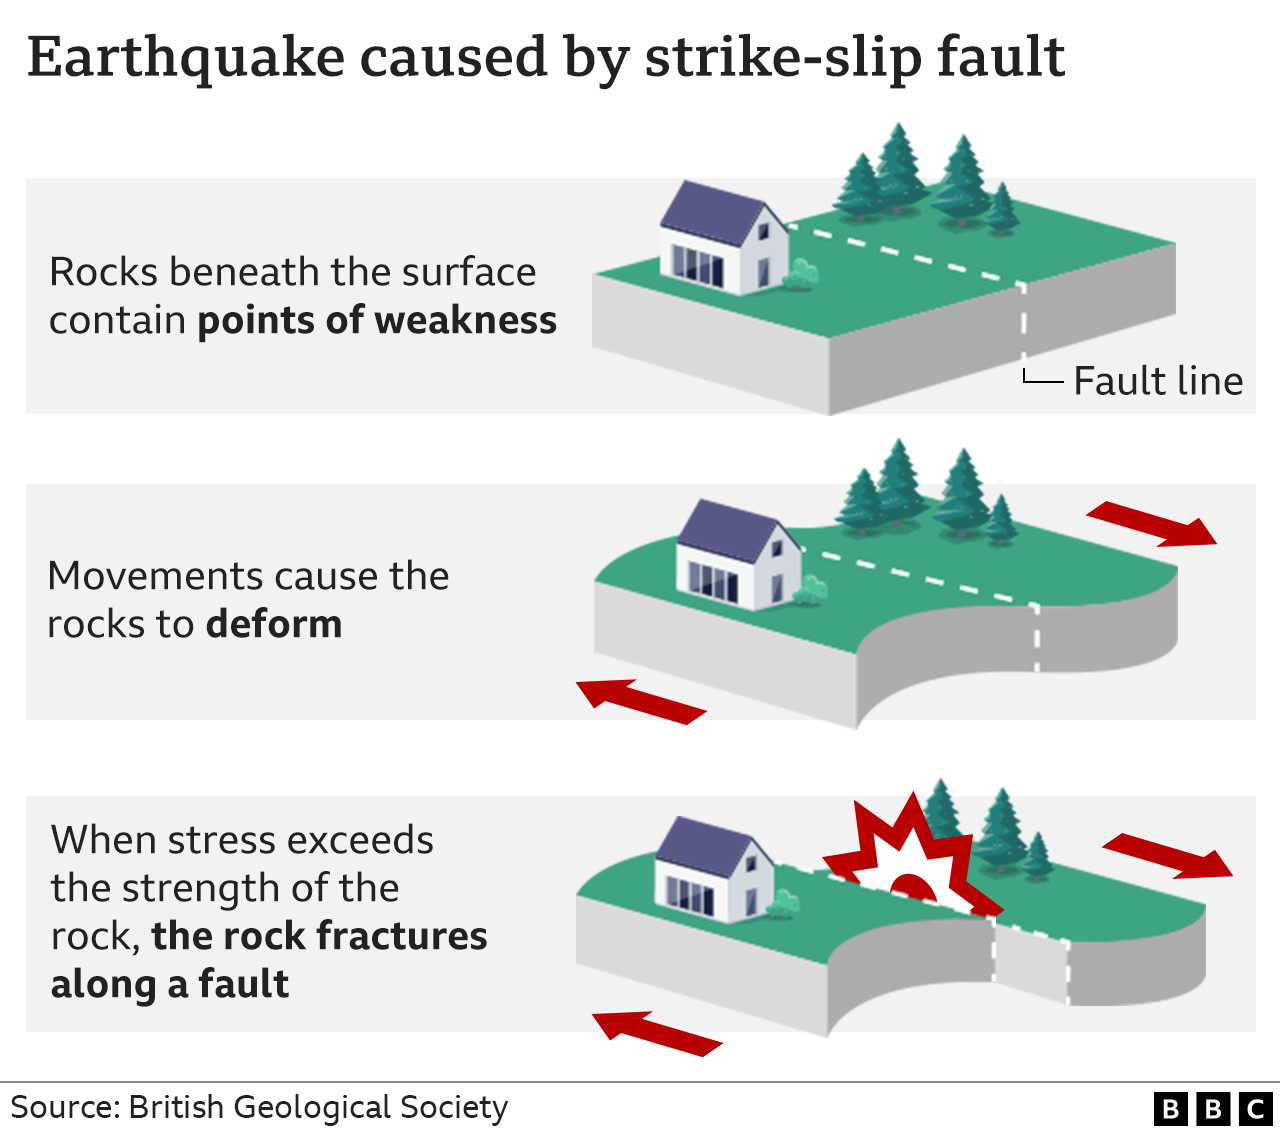 Strike-slip fault earthquake diagram. First image shows how rocks beneath surface contain points of weakness; second image shows how movements cause the rocks to deform; the last image shows that when stress exceeds the strength of the rock, the rock fractures along a fault..